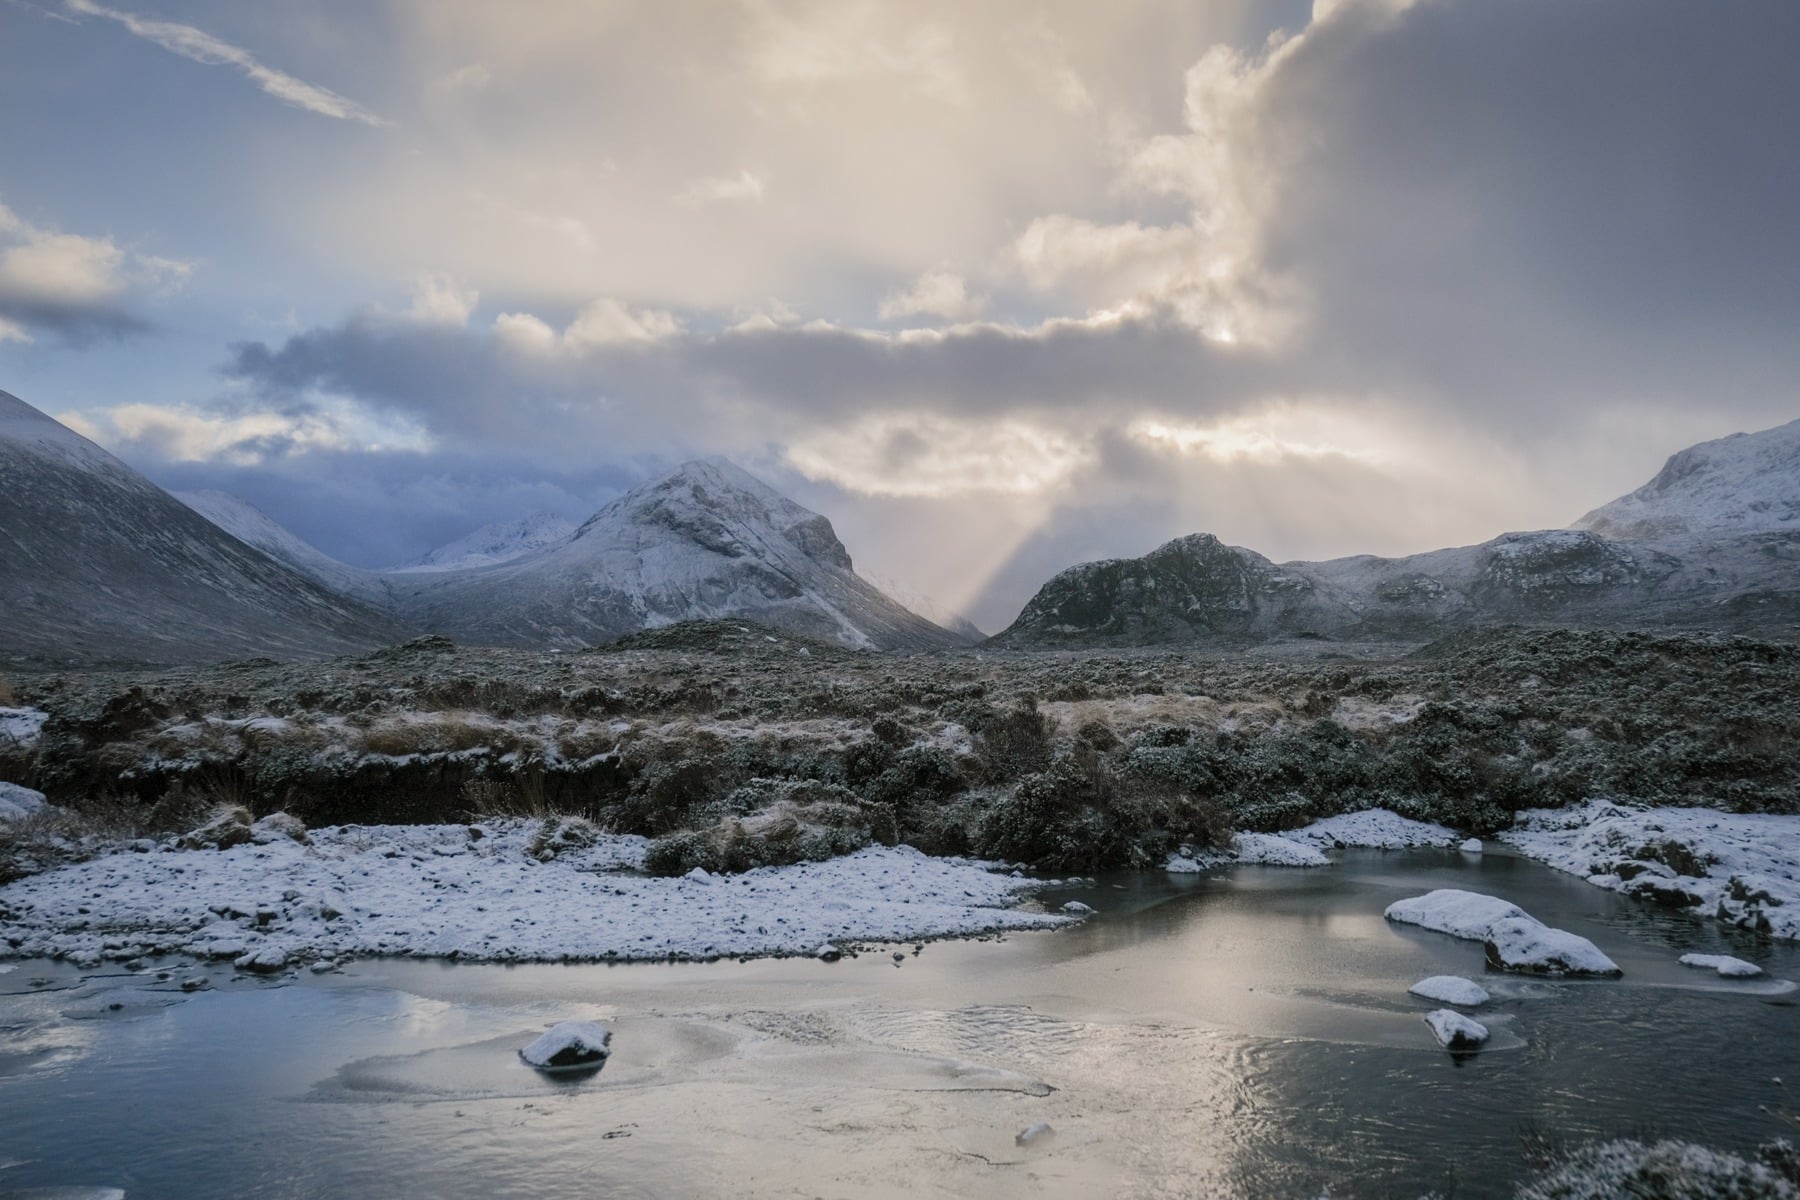 isle skye image with snowy mountain in background